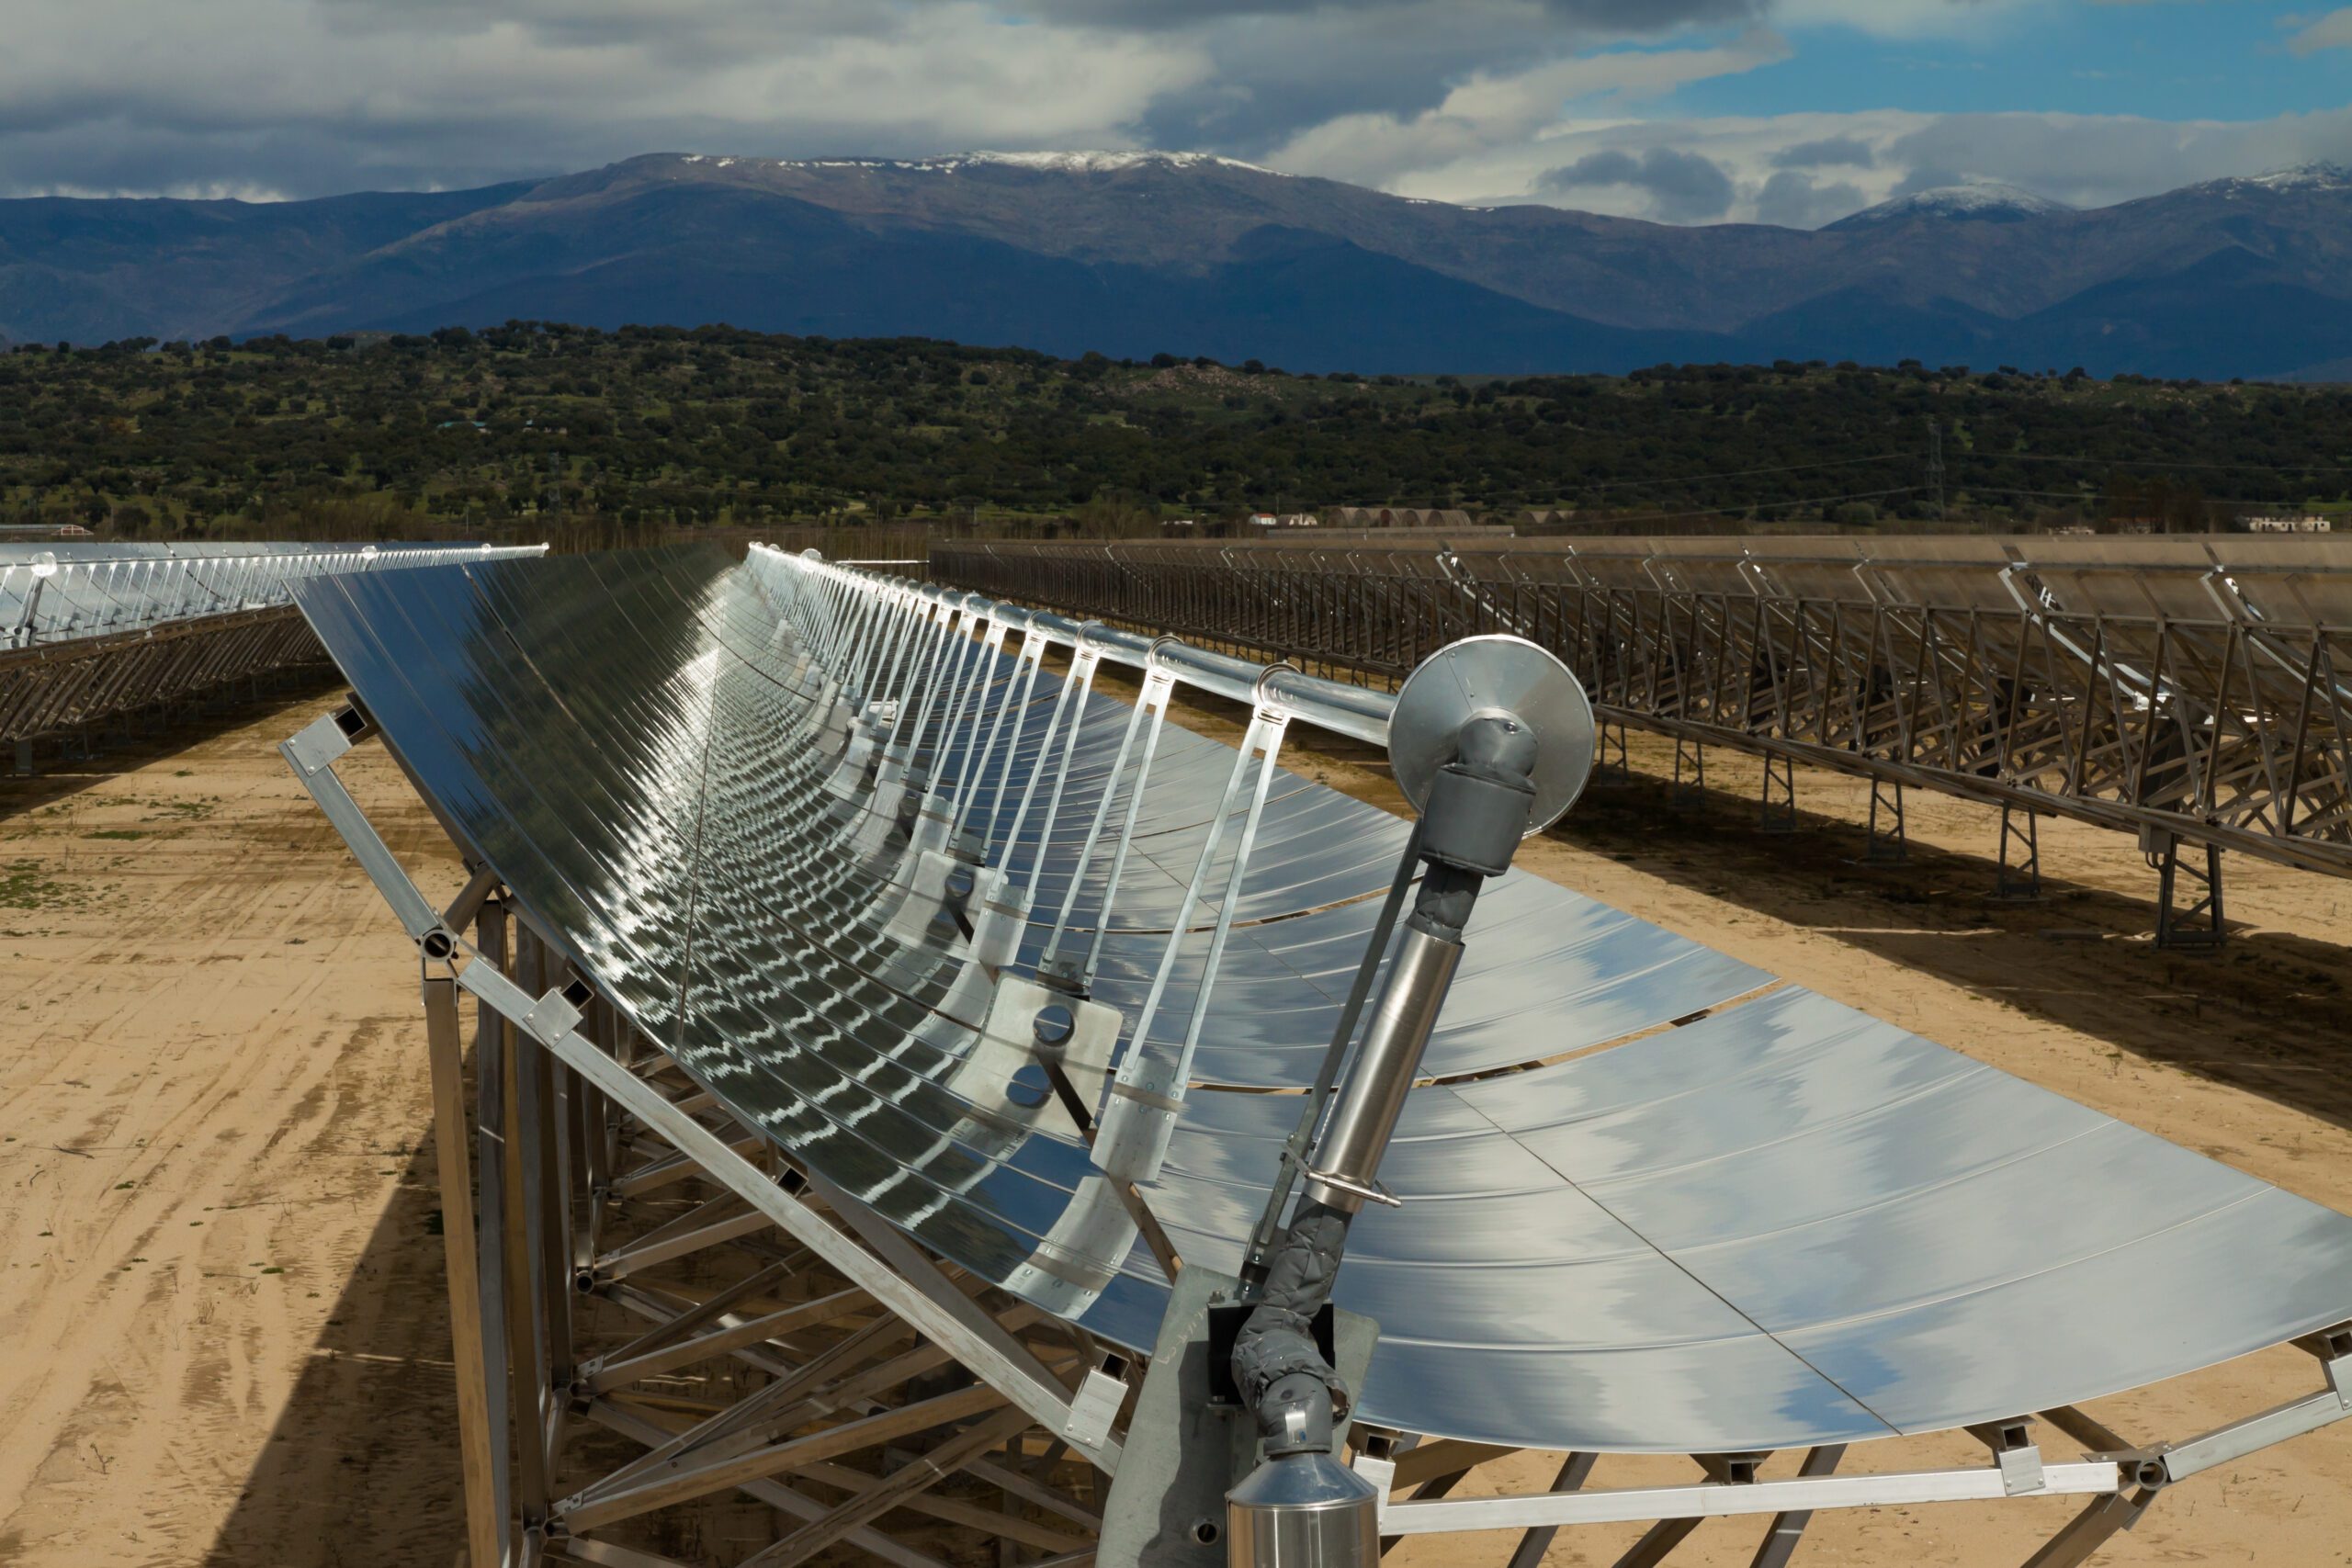 A parabolic trough collector directing solar energy to generate CSP.